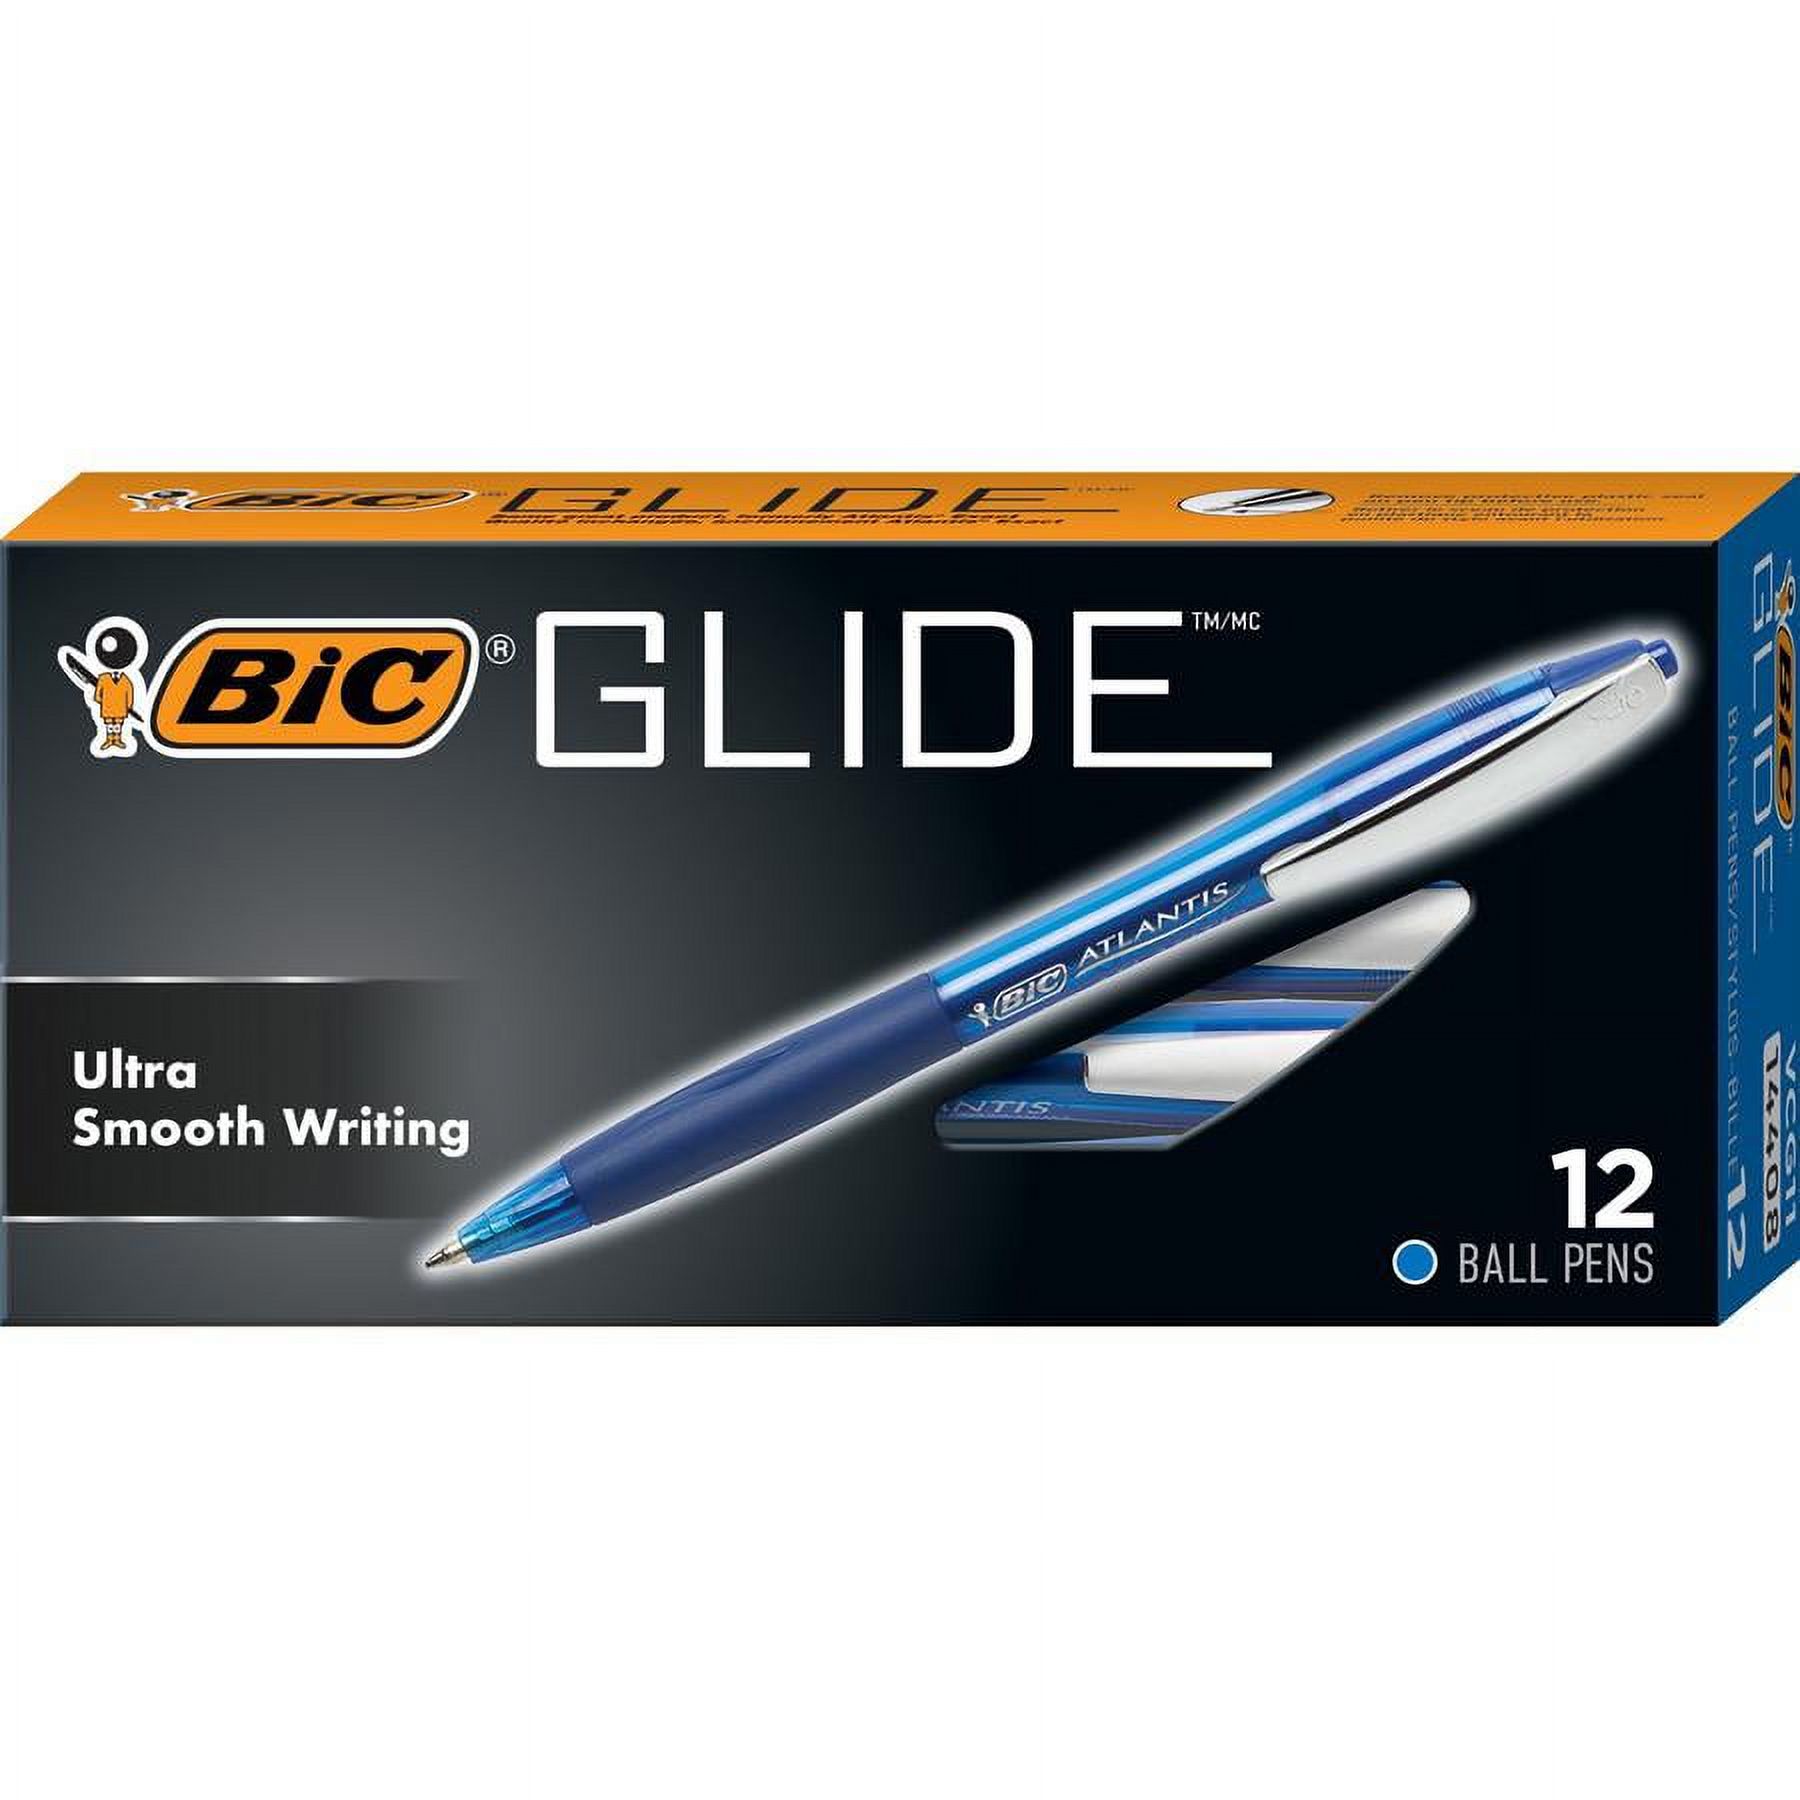 BIC Glide Retractable Ball Pen, Medium Point (1.0 mm), Blue, 12-Count - image 4 of 6